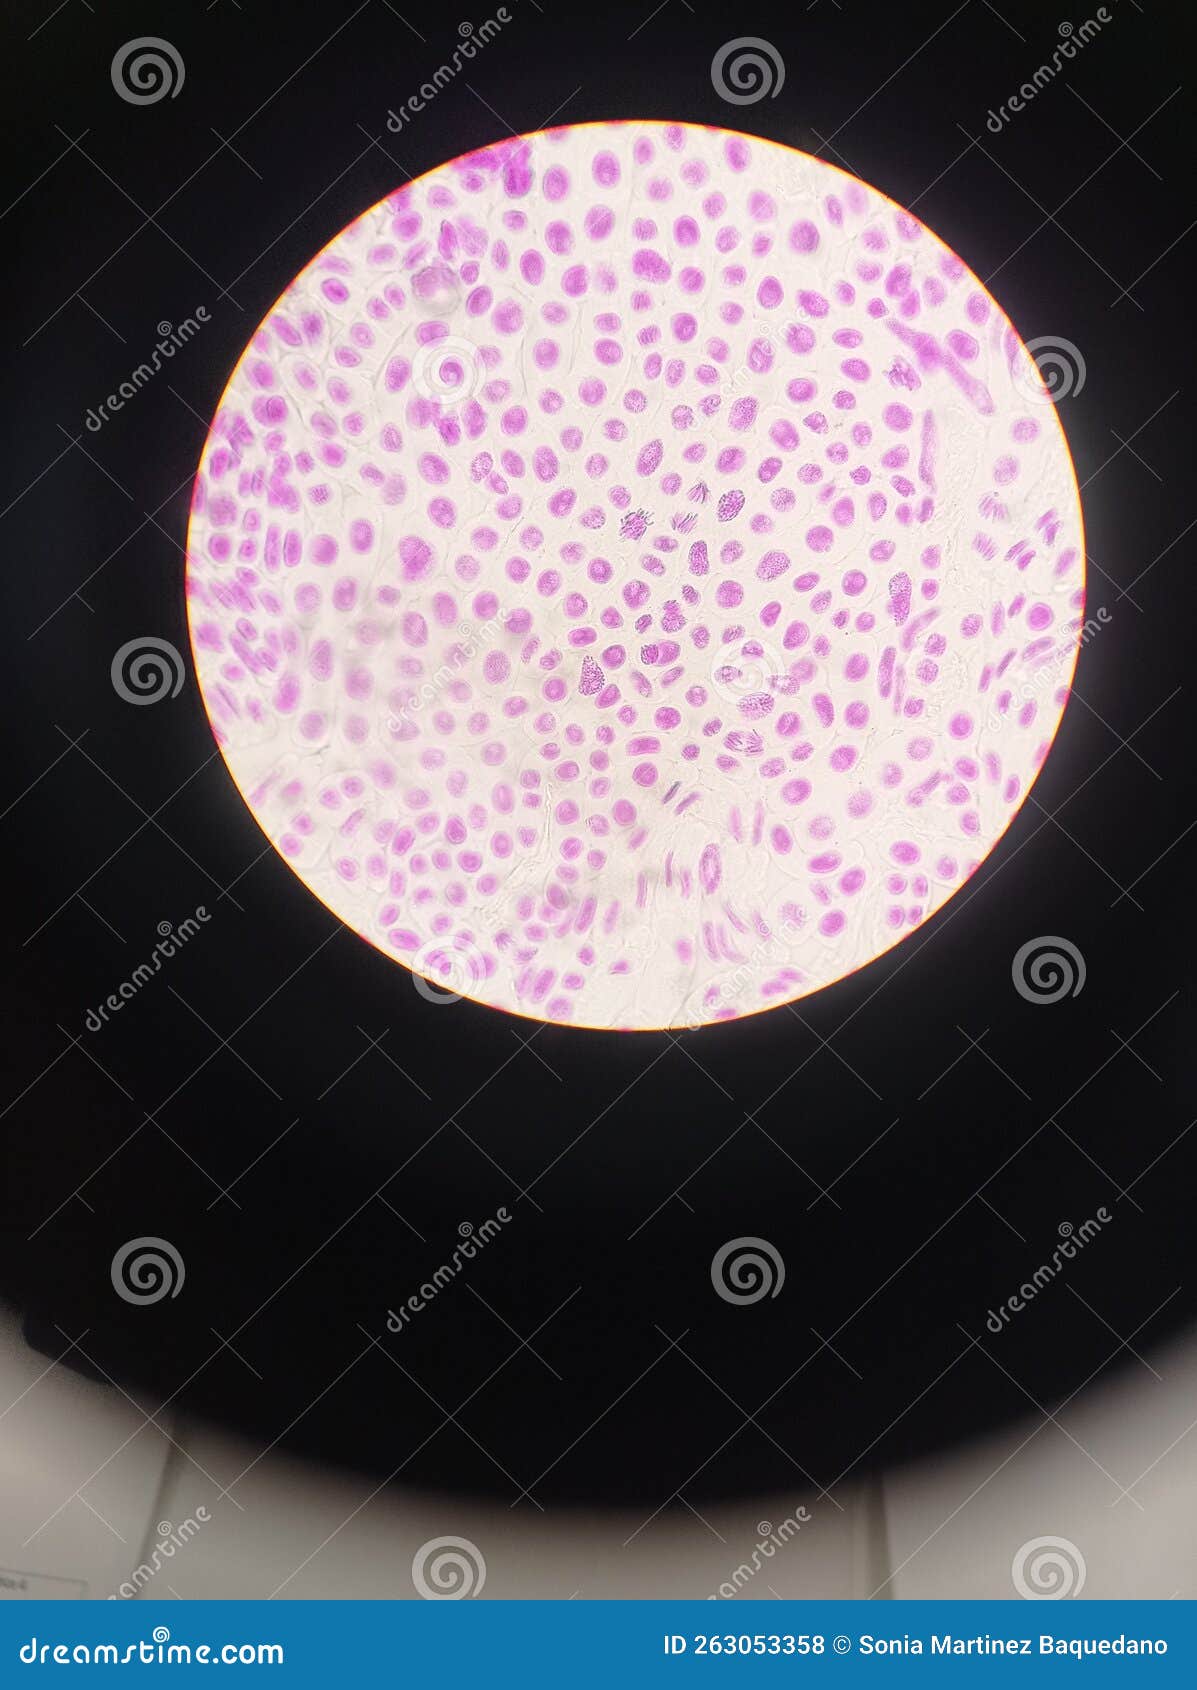 fillament of a cianobacteria with a microscope. cells un mitosis